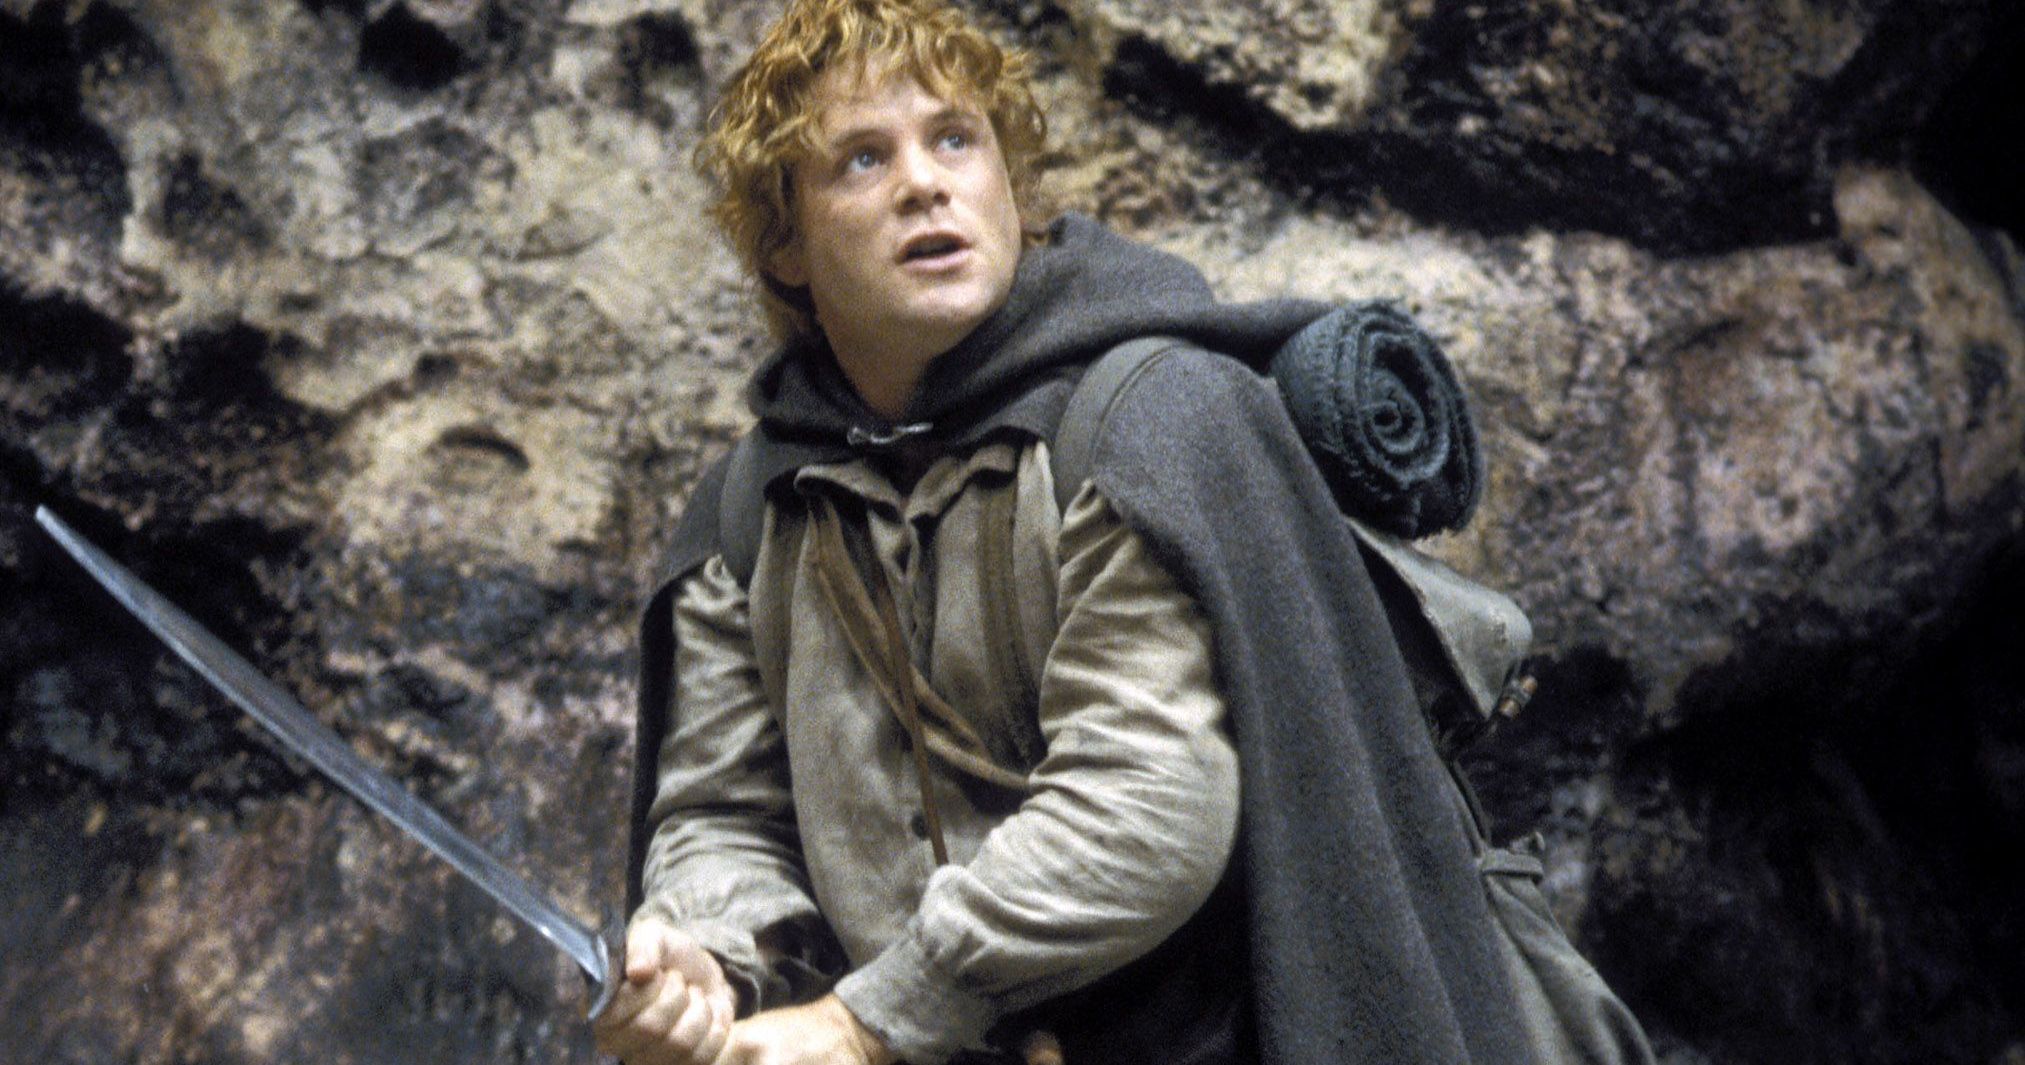 Watching One Lord of the Rings Scene Still Makes Sean Astin Cry